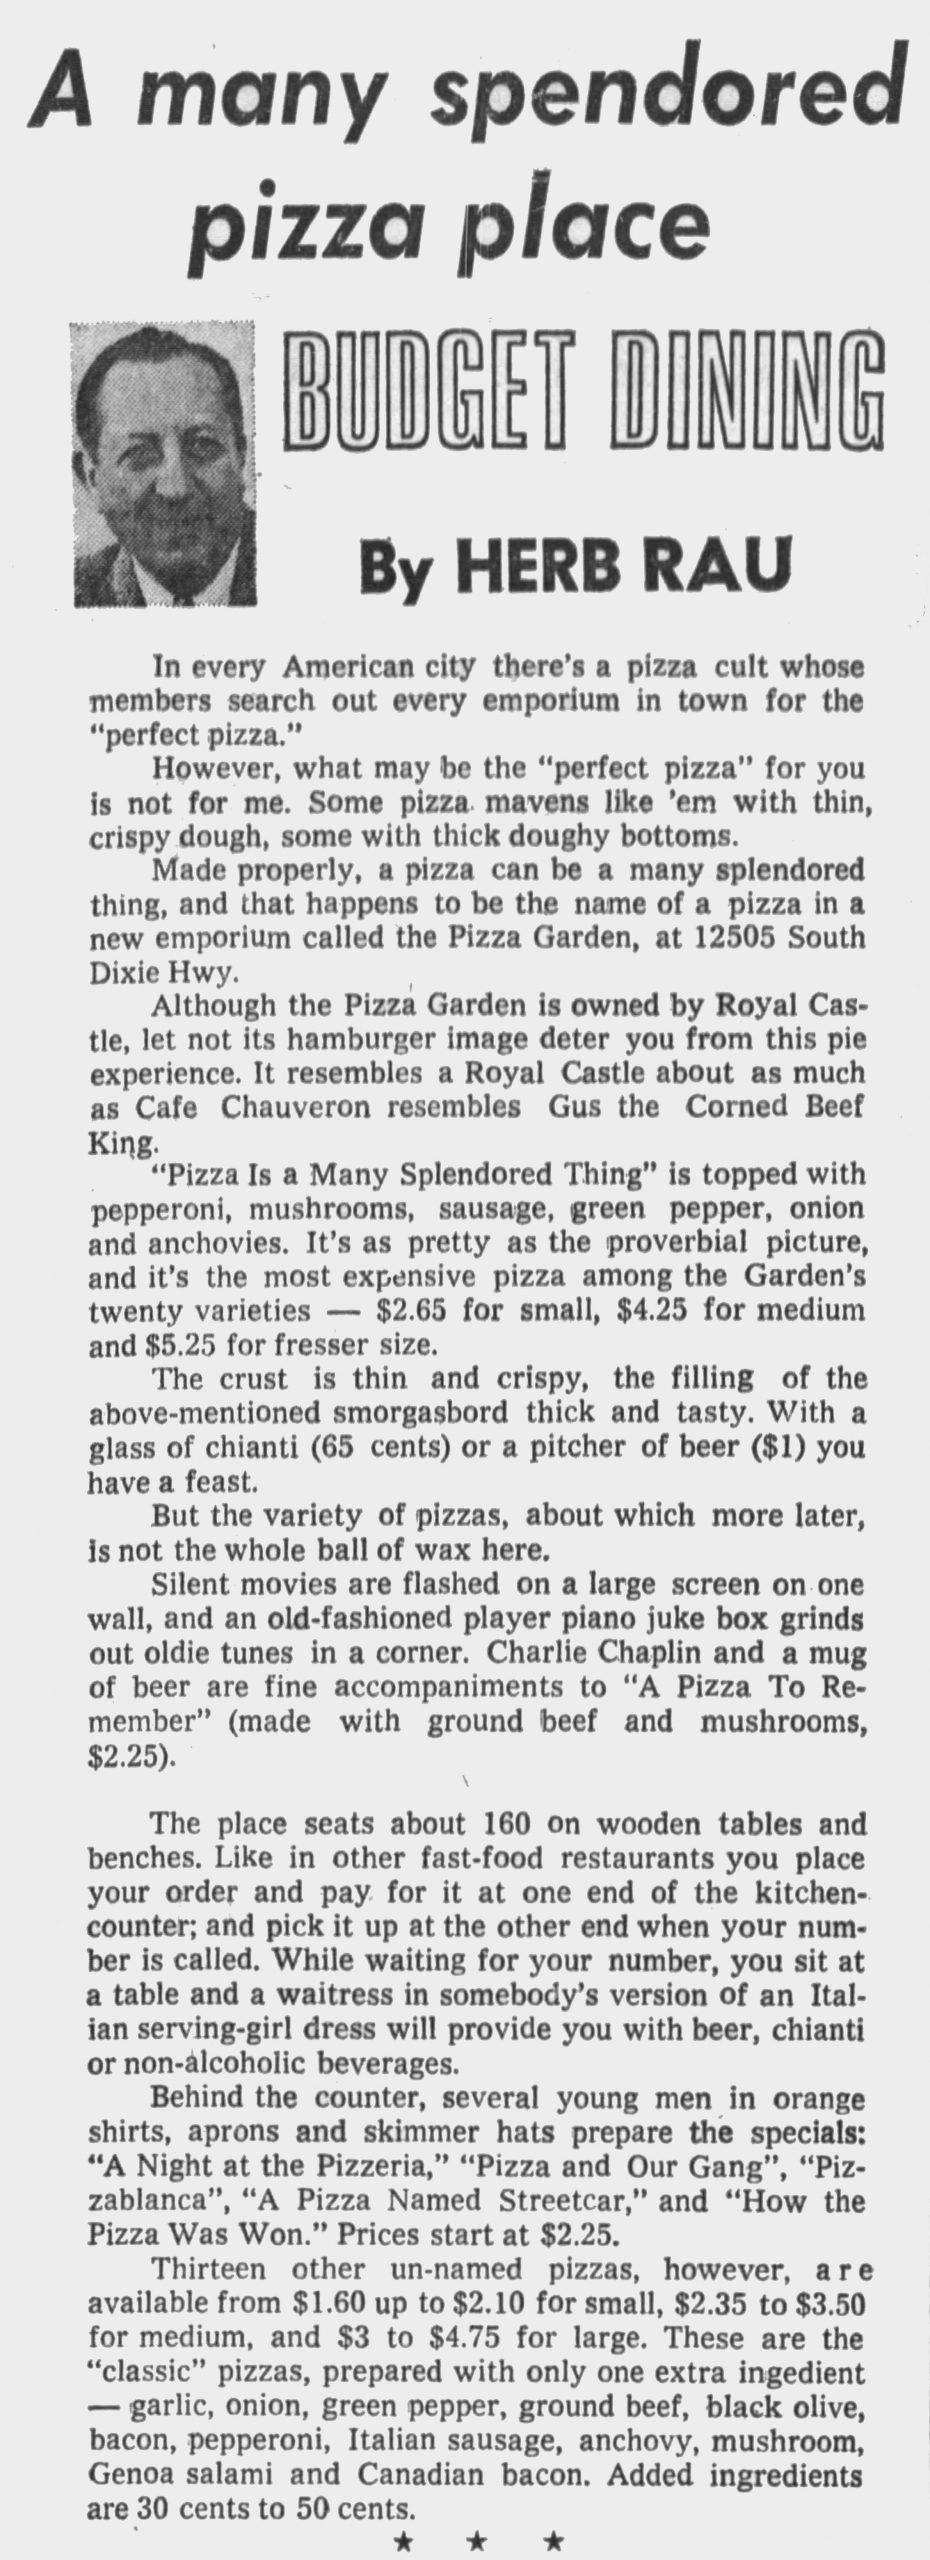 Pizza Garden in The Miami News May 11th, 1974